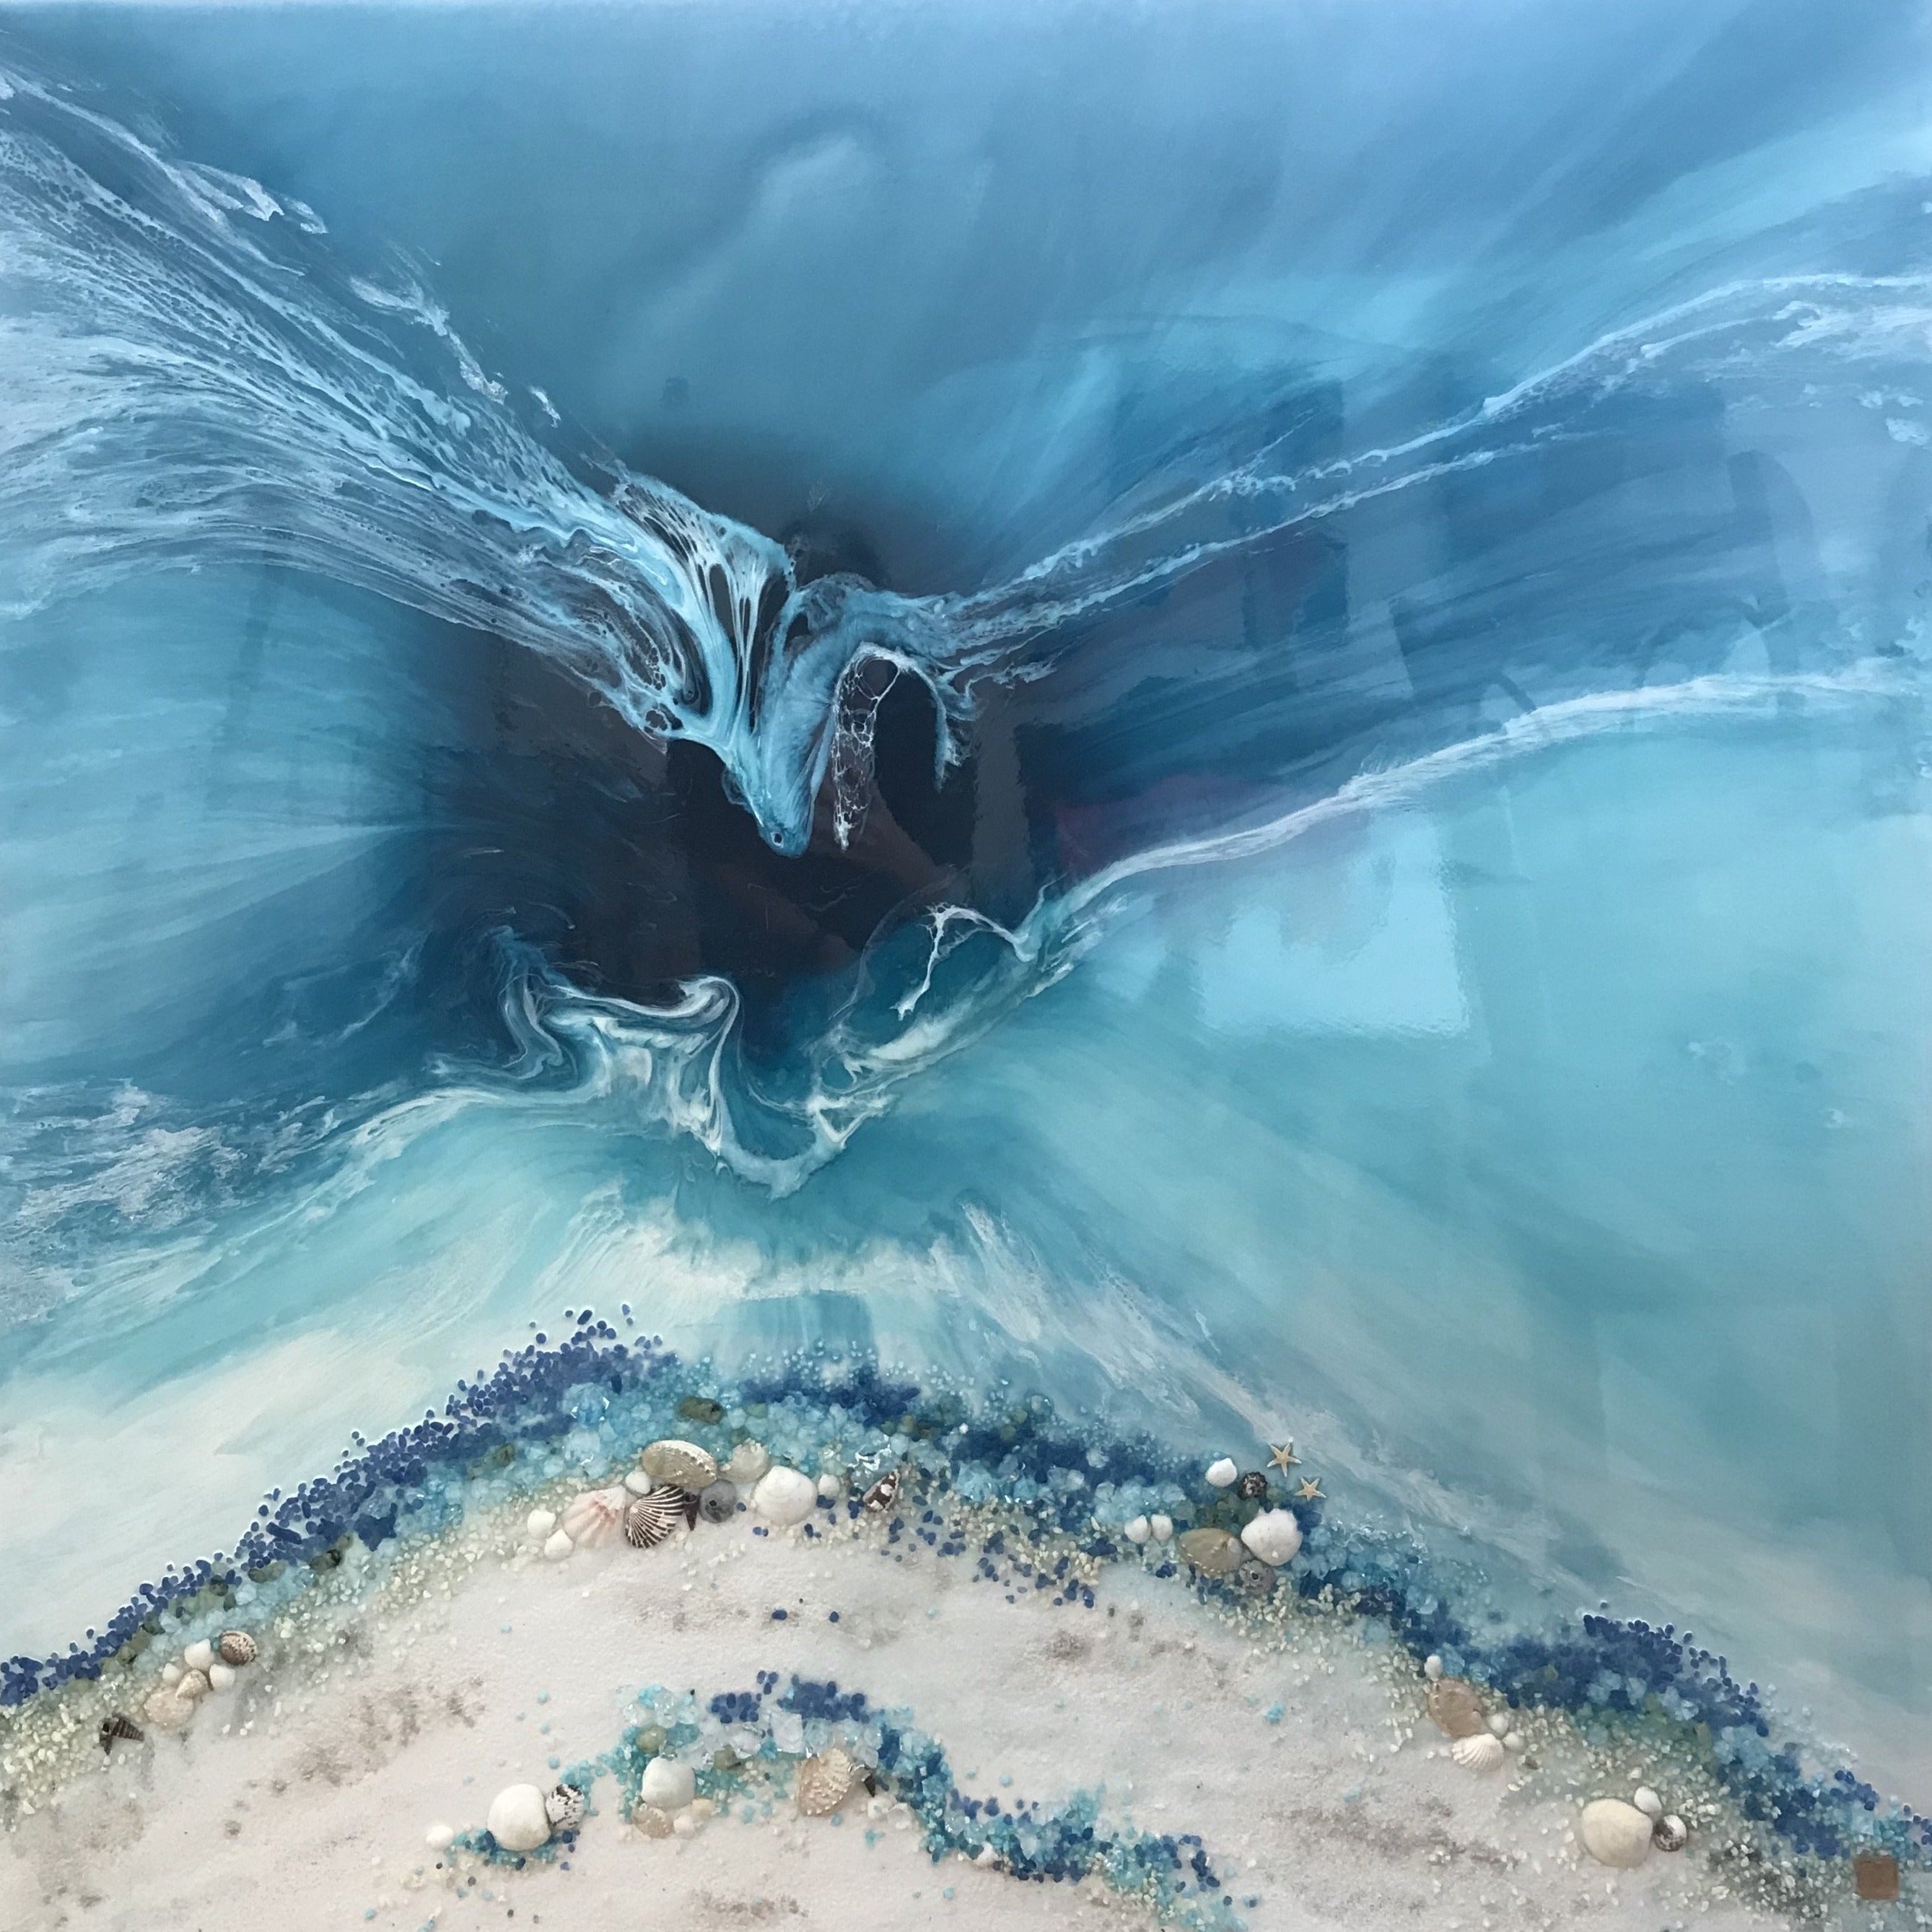 TEAL AND WHITE. Crystal clear. Ocean Original Artwork. Antuanelle 9 Clear. Artwork with Amazonite. 90x90cm